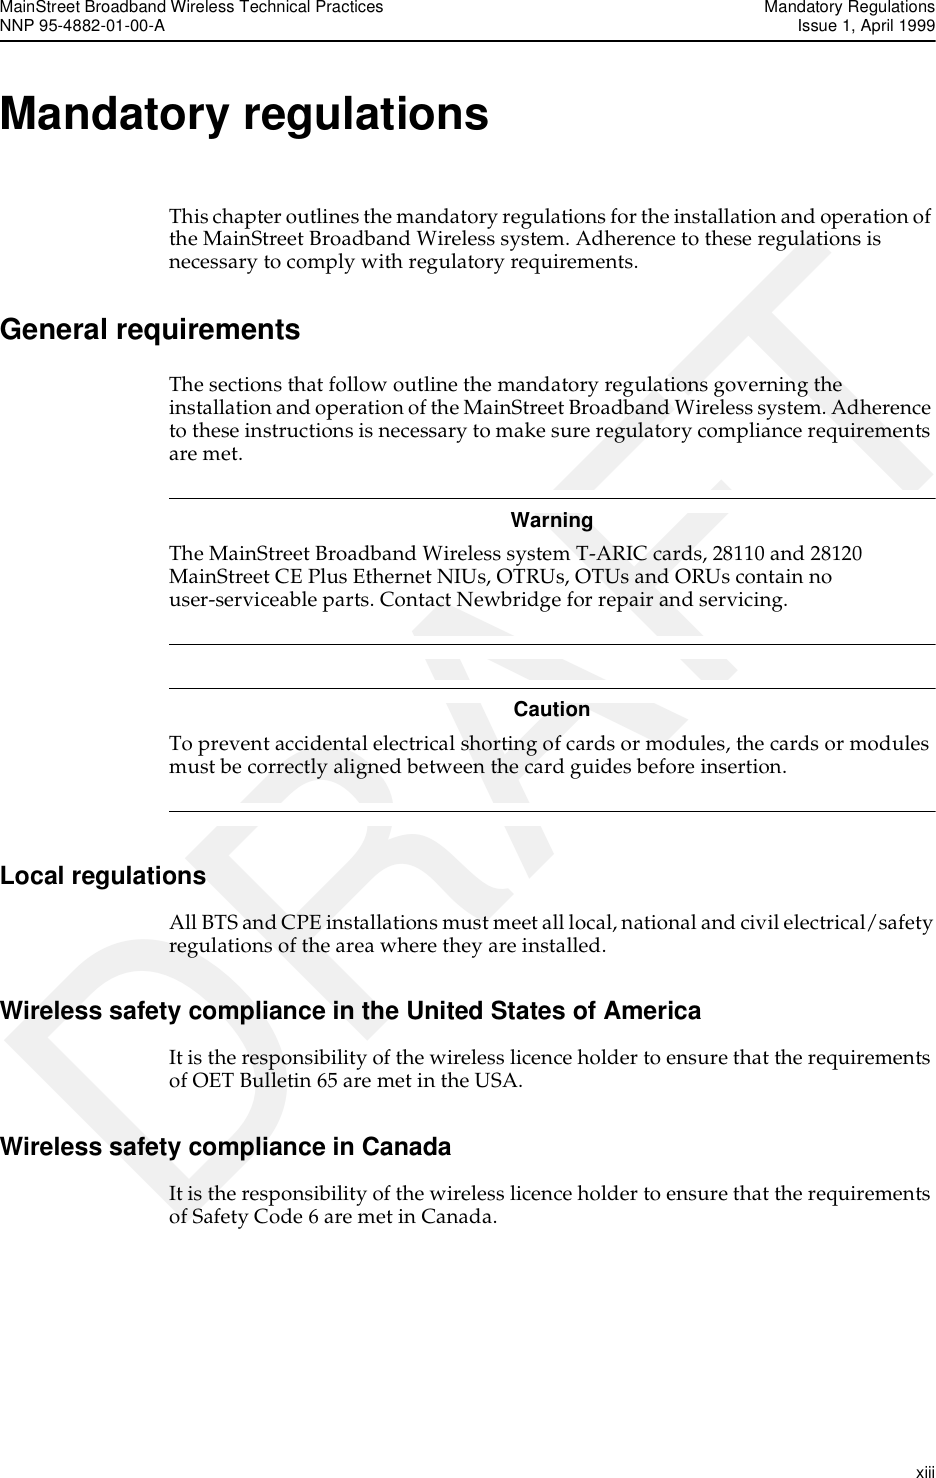 MainStreet Broadband Wireless Technical Practices Mandatory RegulationsNNP 95-4882-01-00-A  Issue 1, April 1999   xiiiDRAFTMandatory regulationsThis chapter outlines the mandatory regulations for the installation and operation of the MainStreet Broadband Wireless system. Adherence to these regulations is necessary to comply with regulatory requirements.General requirementsThe sections that follow outline the mandatory regulations governing the installation and operation of the MainStreet Broadband Wireless system. Adherence to these instructions is necessary to make sure regulatory compliance requirements are met.WarningThe MainStreet Broadband Wireless system T-ARIC cards, 28110 and 28120 MainStreet CE Plus Ethernet NIUs, OTRUs, OTUs and ORUs contain no user-serviceable parts. Contact Newbridge for repair and servicing. CautionTo prevent accidental electrical shorting of cards or modules, the cards or modules must be correctly aligned between the card guides before insertion. Local regulationsAll BTS and CPE installations must meet all local, national and civil electrical/safety regulations of the area where they are installed.Wireless safety compliance in the United States of America It is the responsibility of the wireless licence holder to ensure that the requirements of OET Bulletin 65 are met in the USA.Wireless safety compliance in CanadaIt is the responsibility of the wireless licence holder to ensure that the requirements of Safety Code 6 are met in Canada.